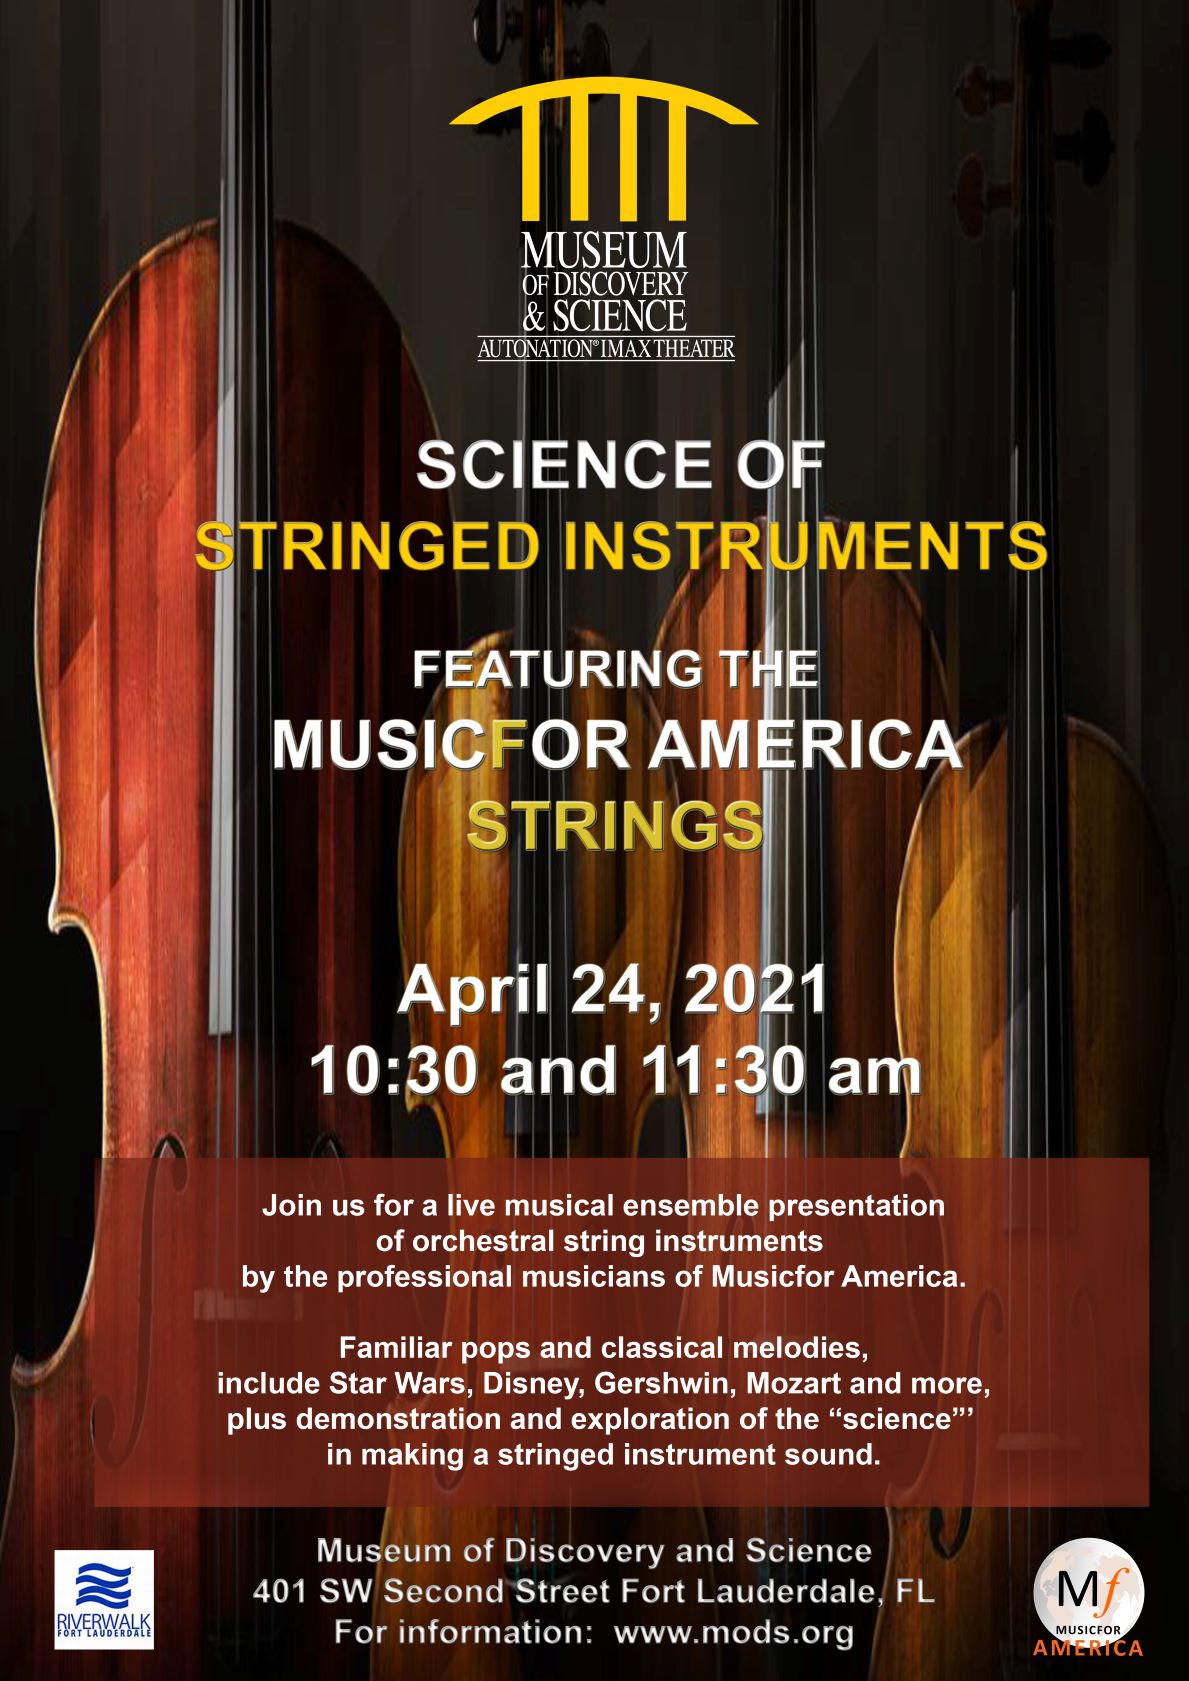 Science of Stringed Instruments Performance